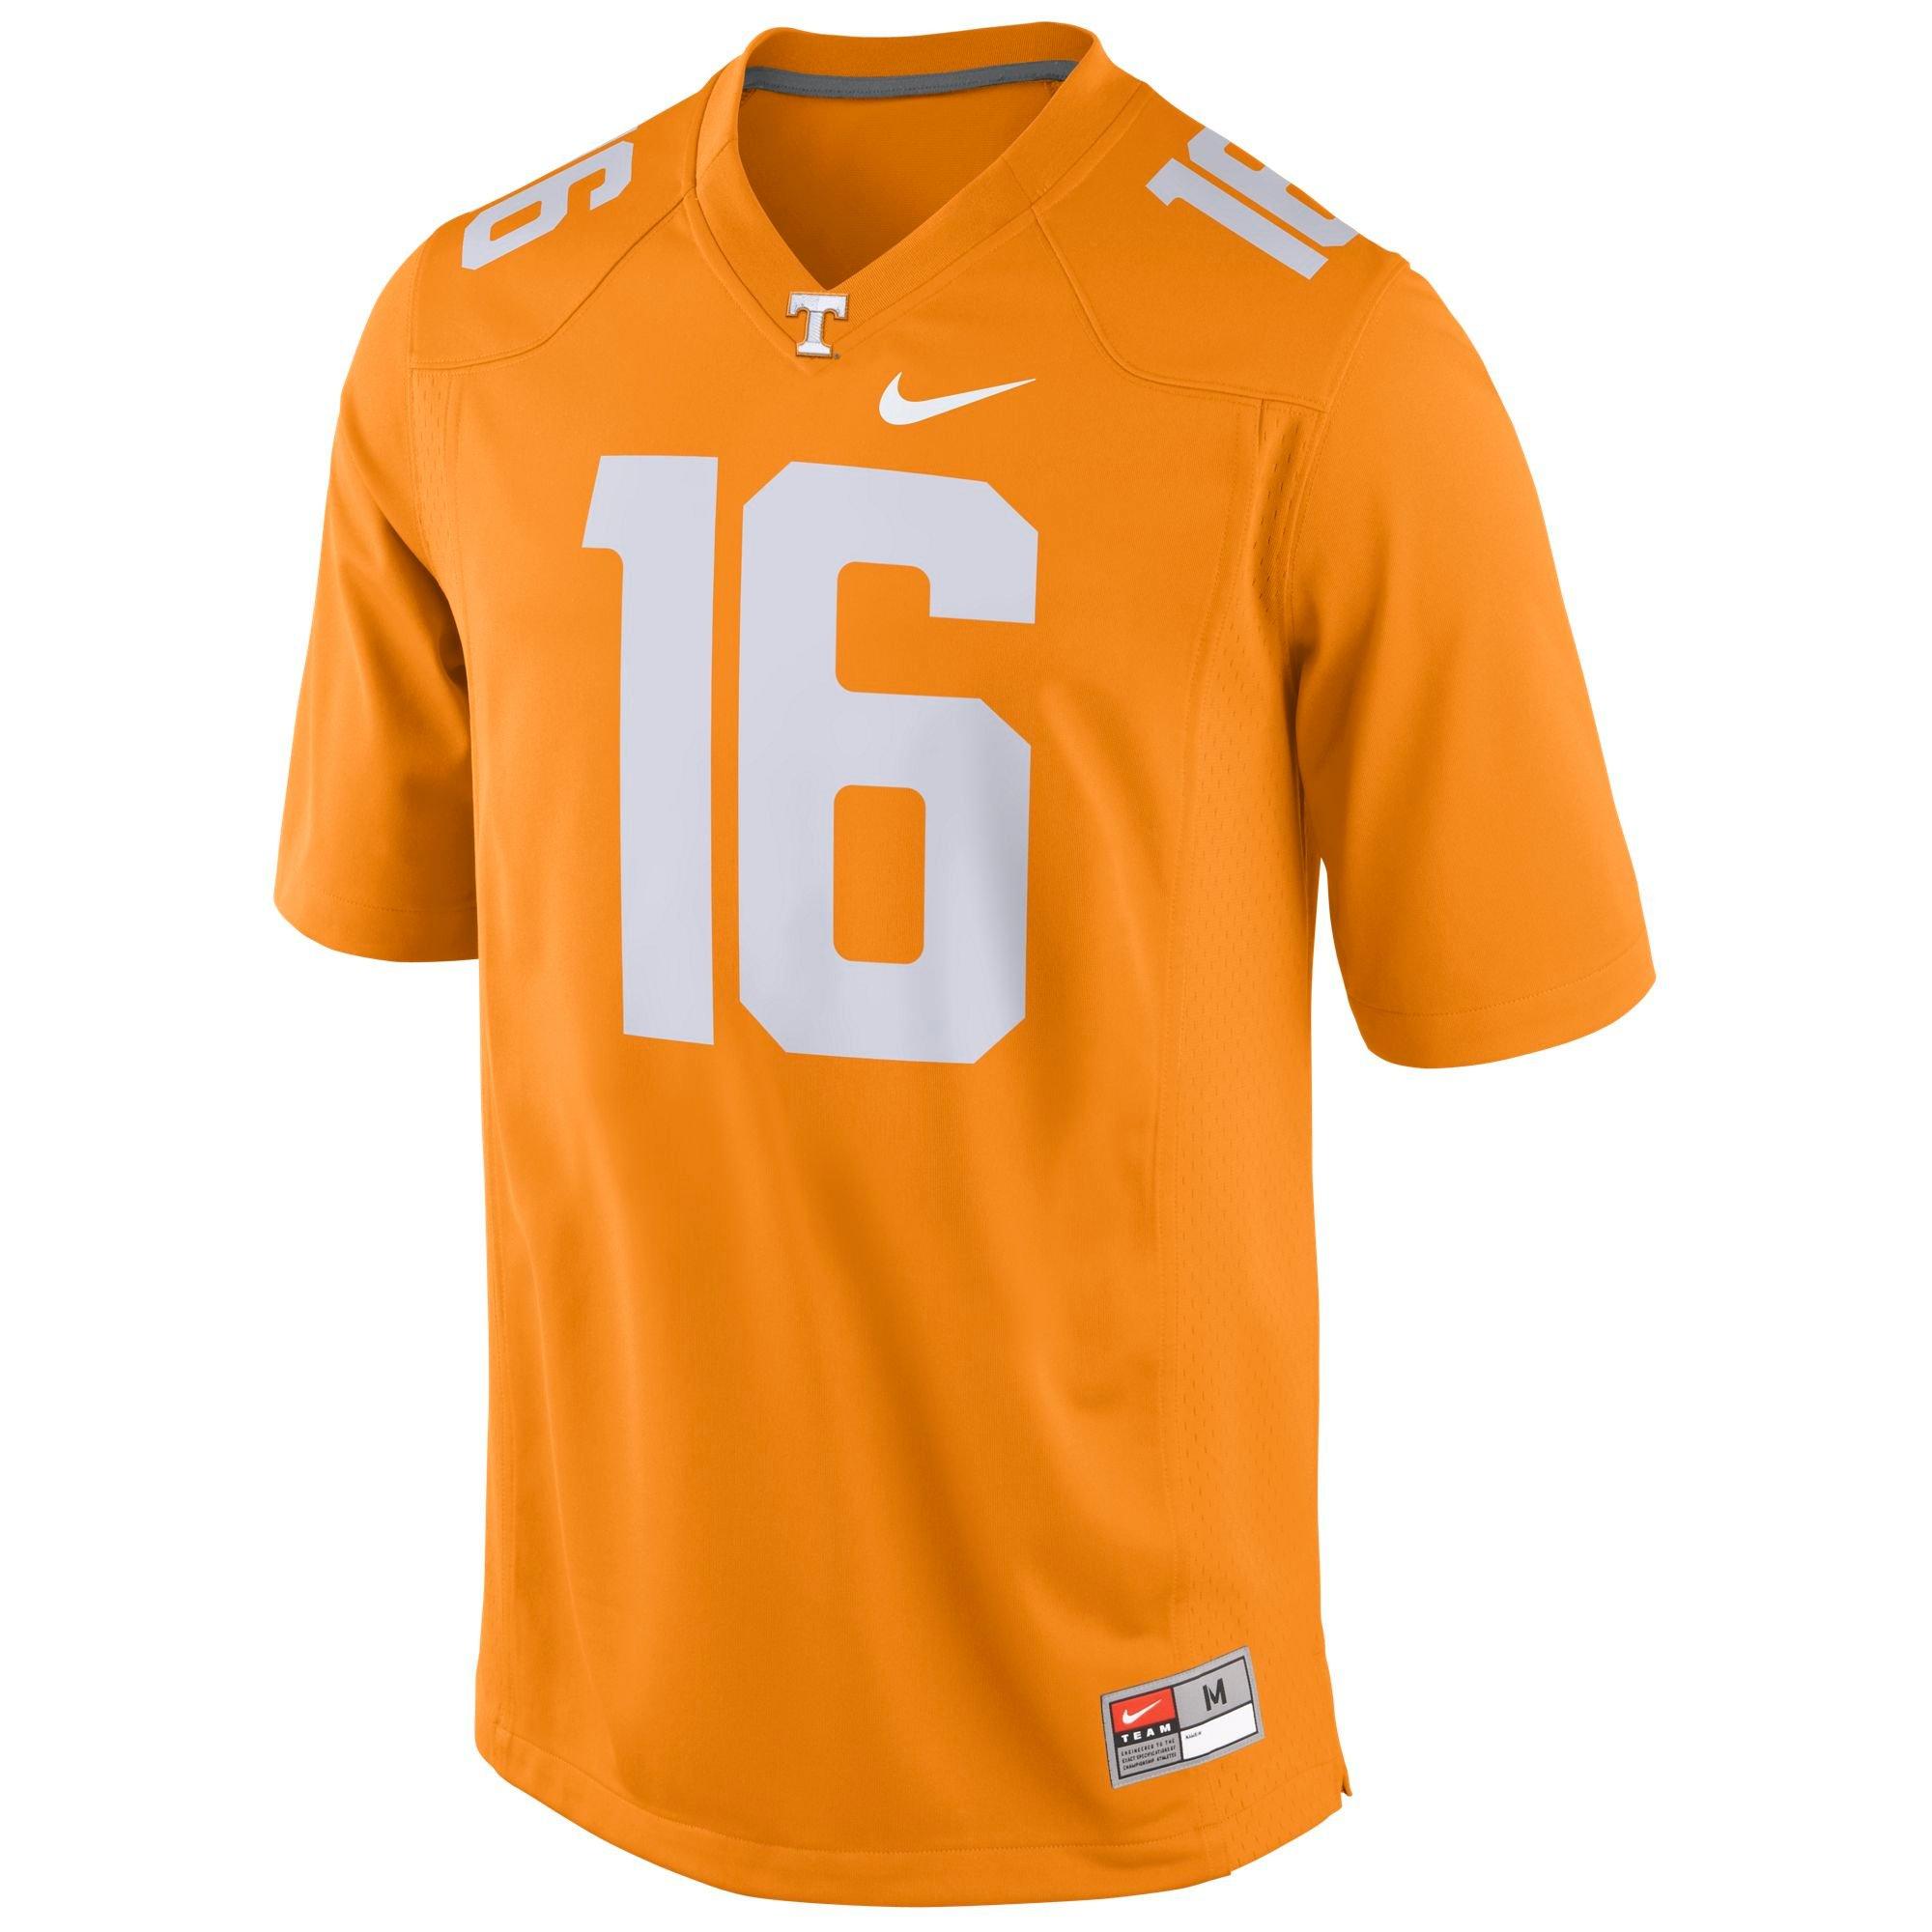 authentic peyton manning tennessee jersey